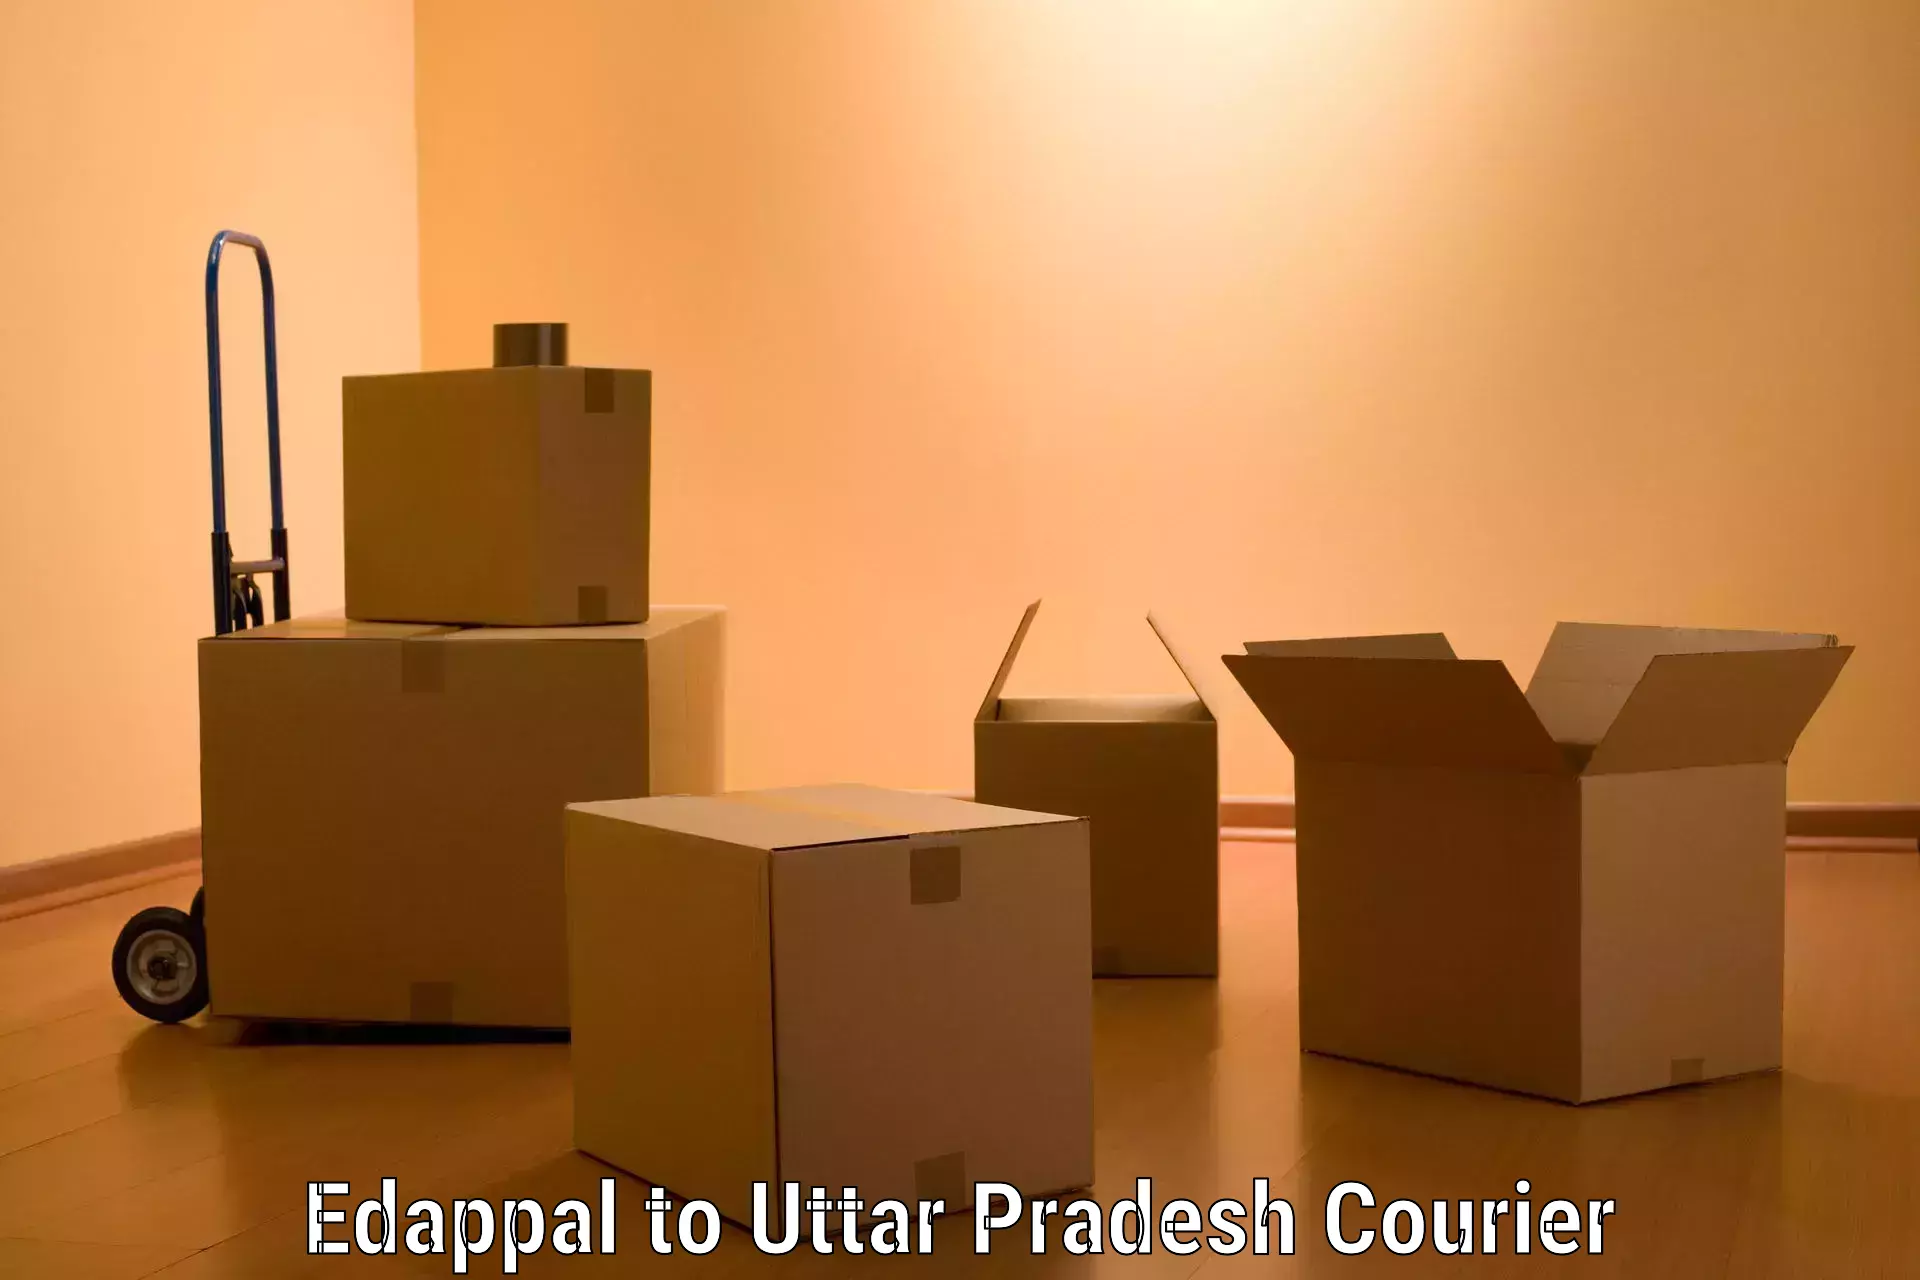 Furniture delivery service Edappal to Najibabad